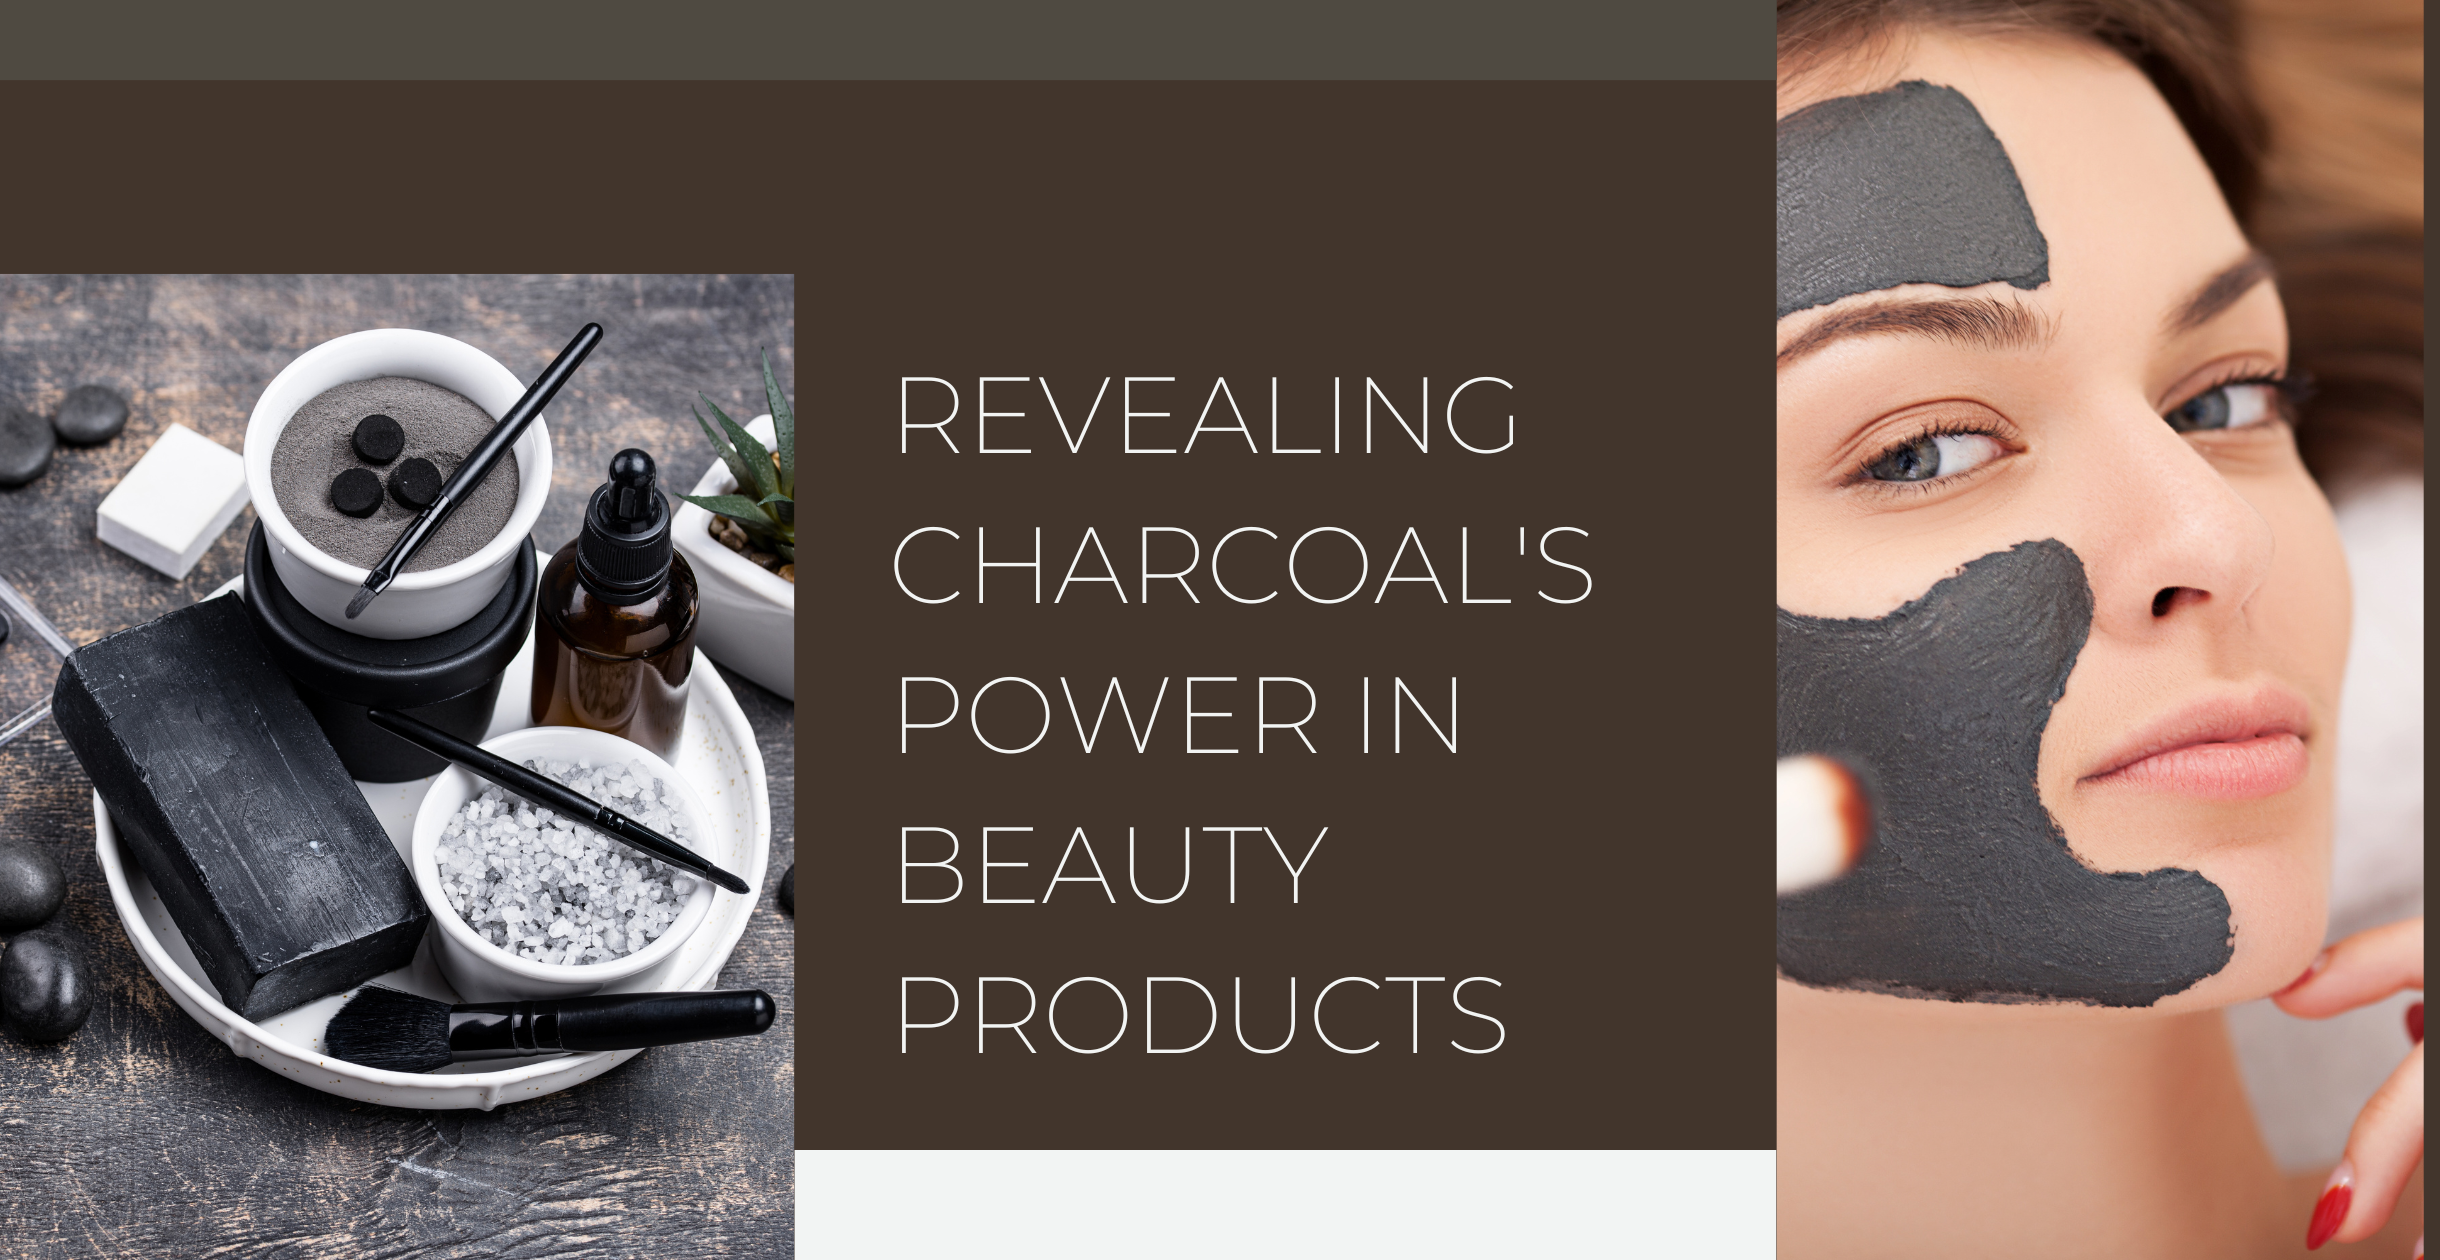 Revealing Charcoal's Power in Beauty Products